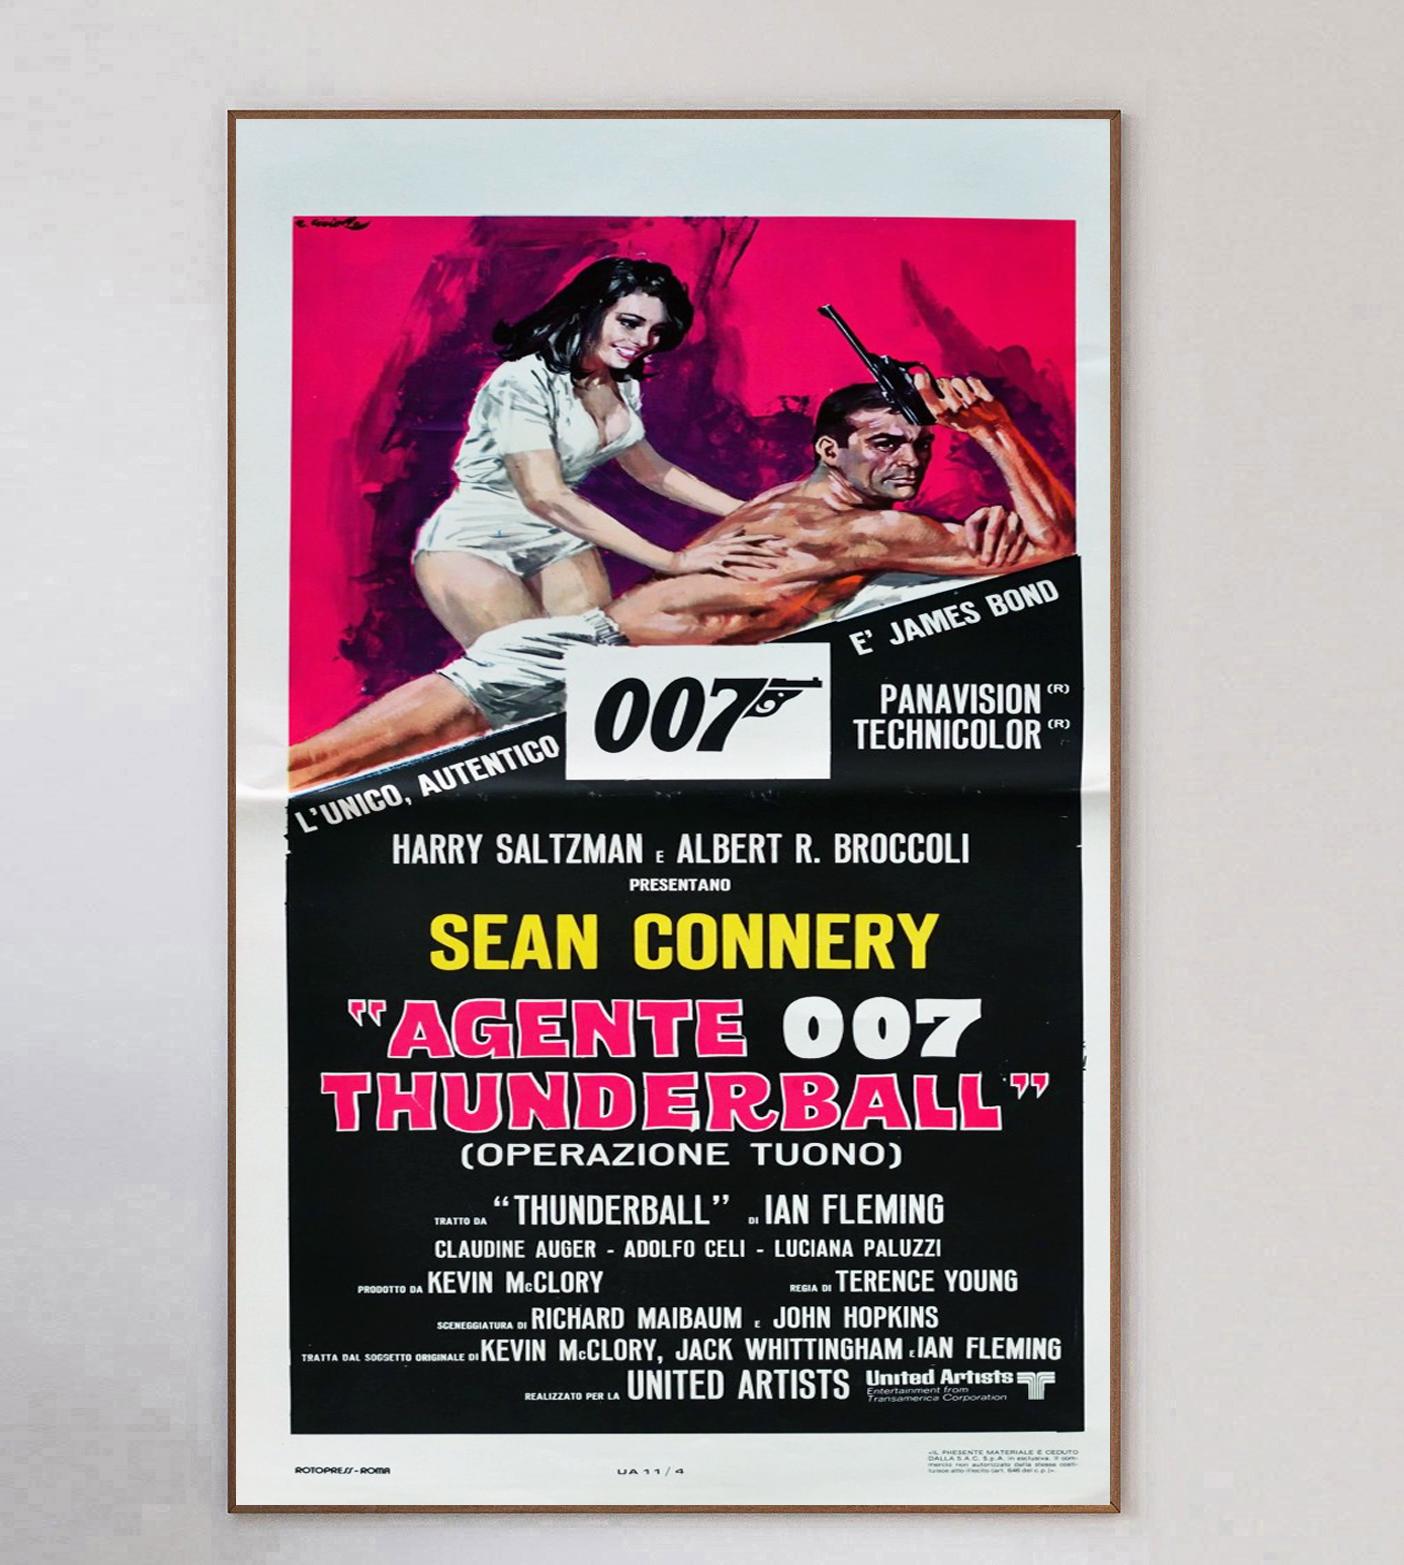 The fourth film in the James Bond series produced by EON Productions, 